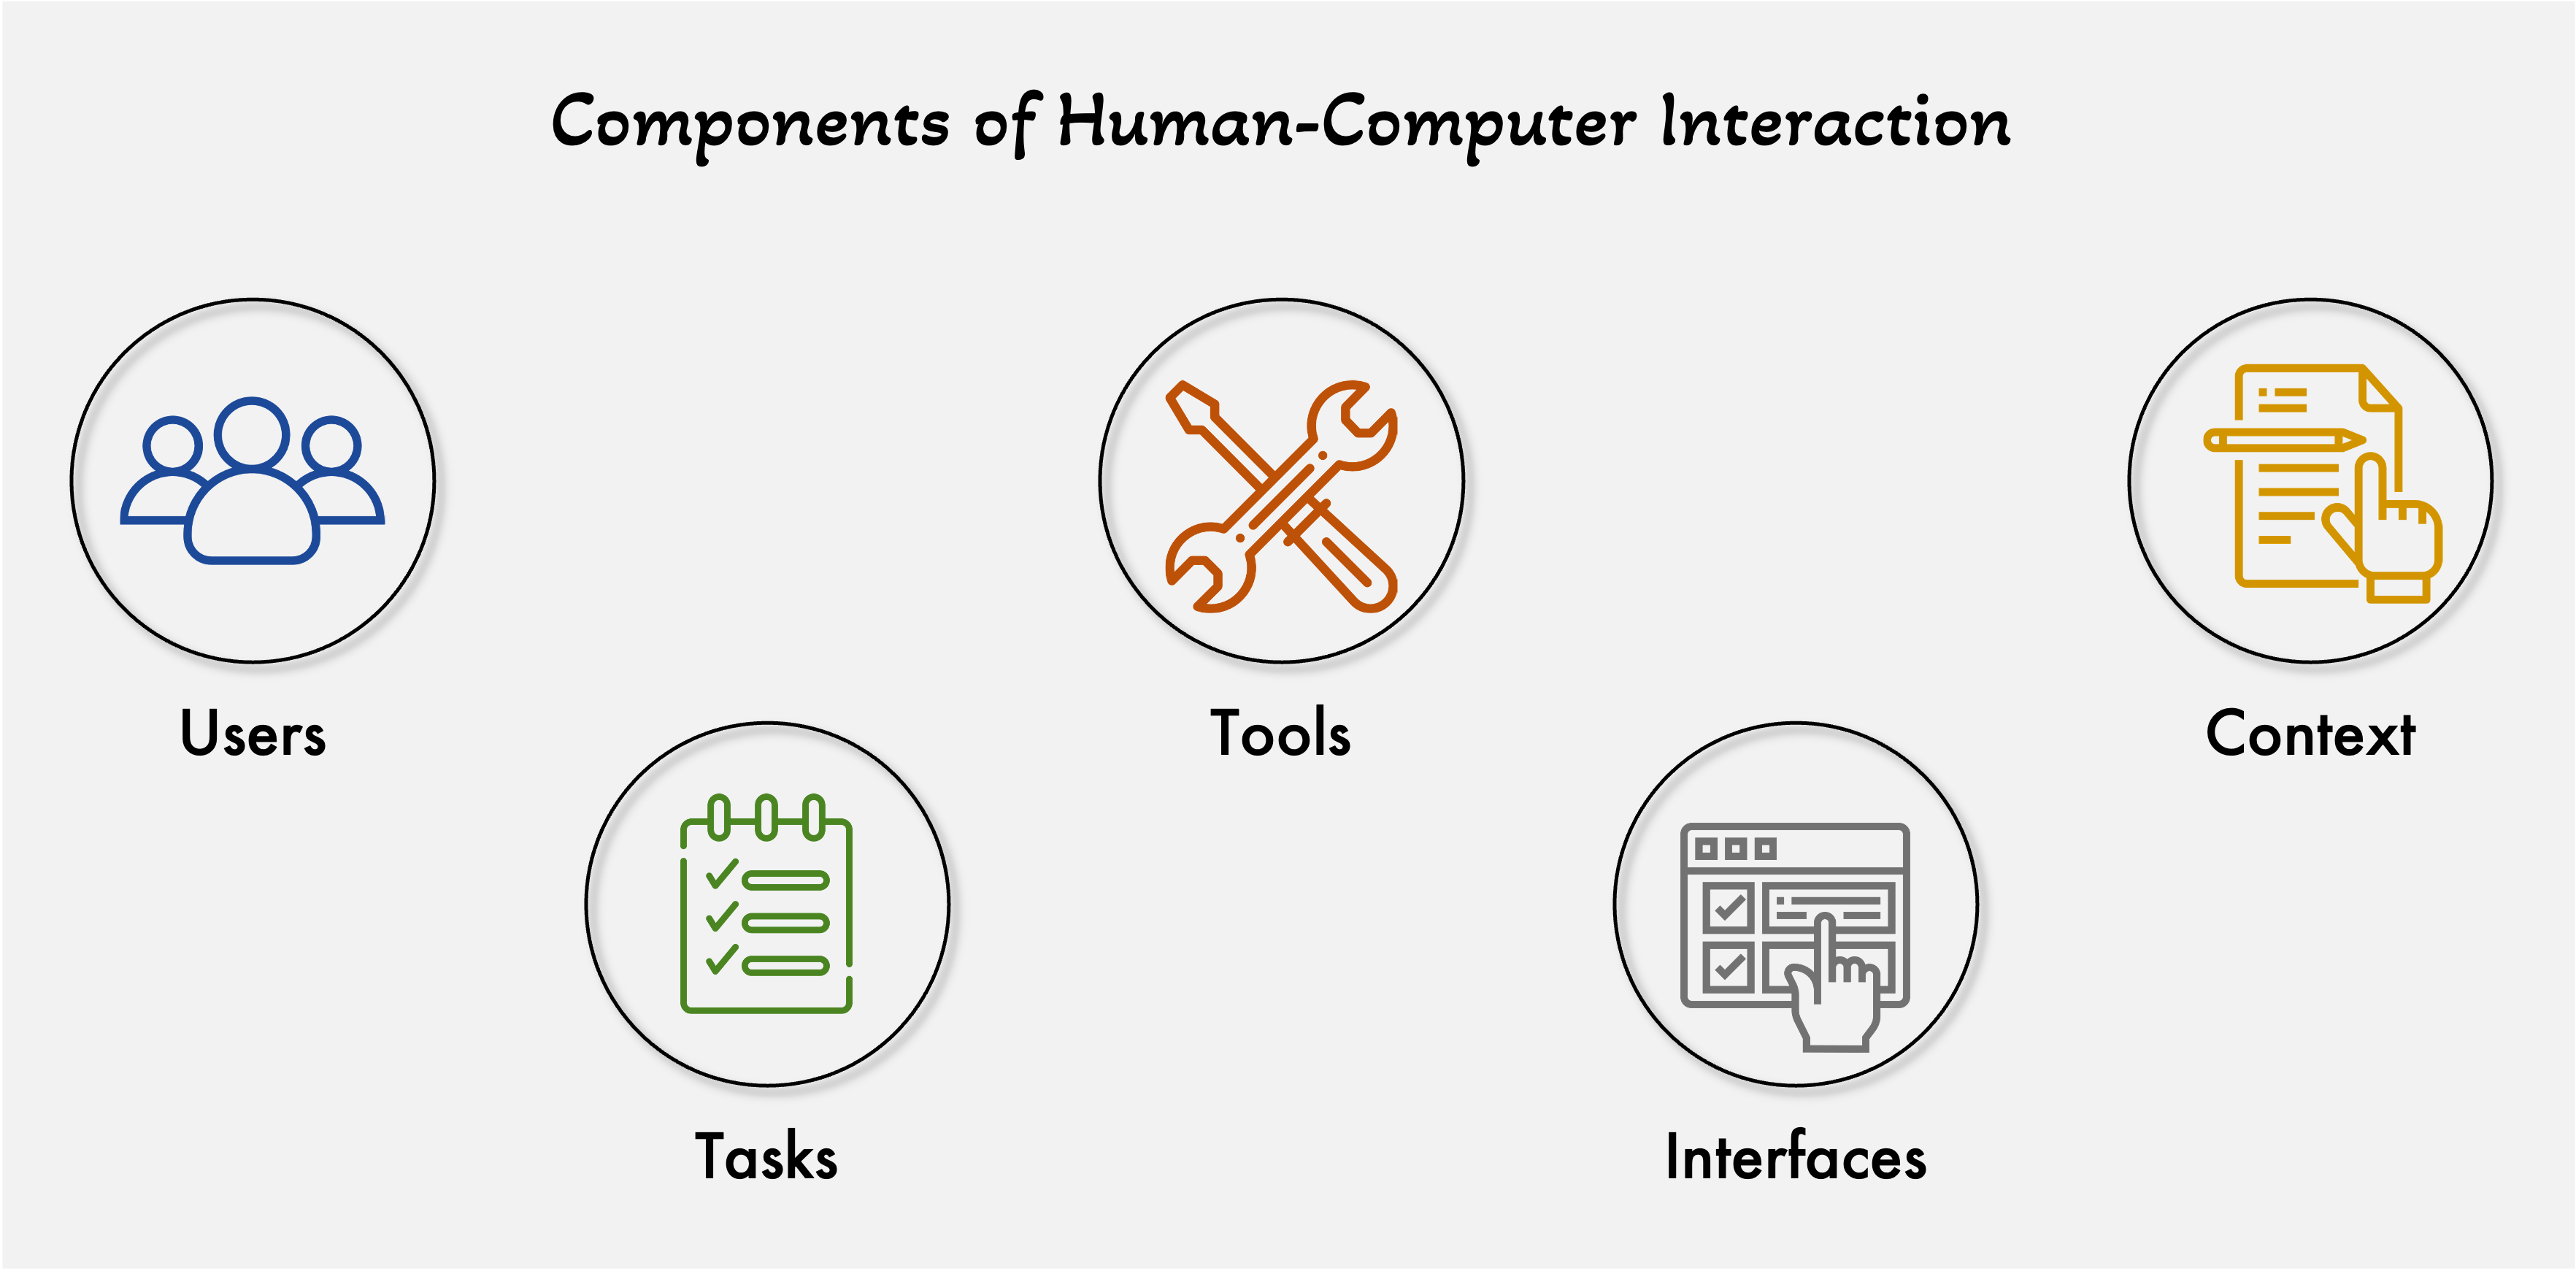 Components of Human-Computer Interaction